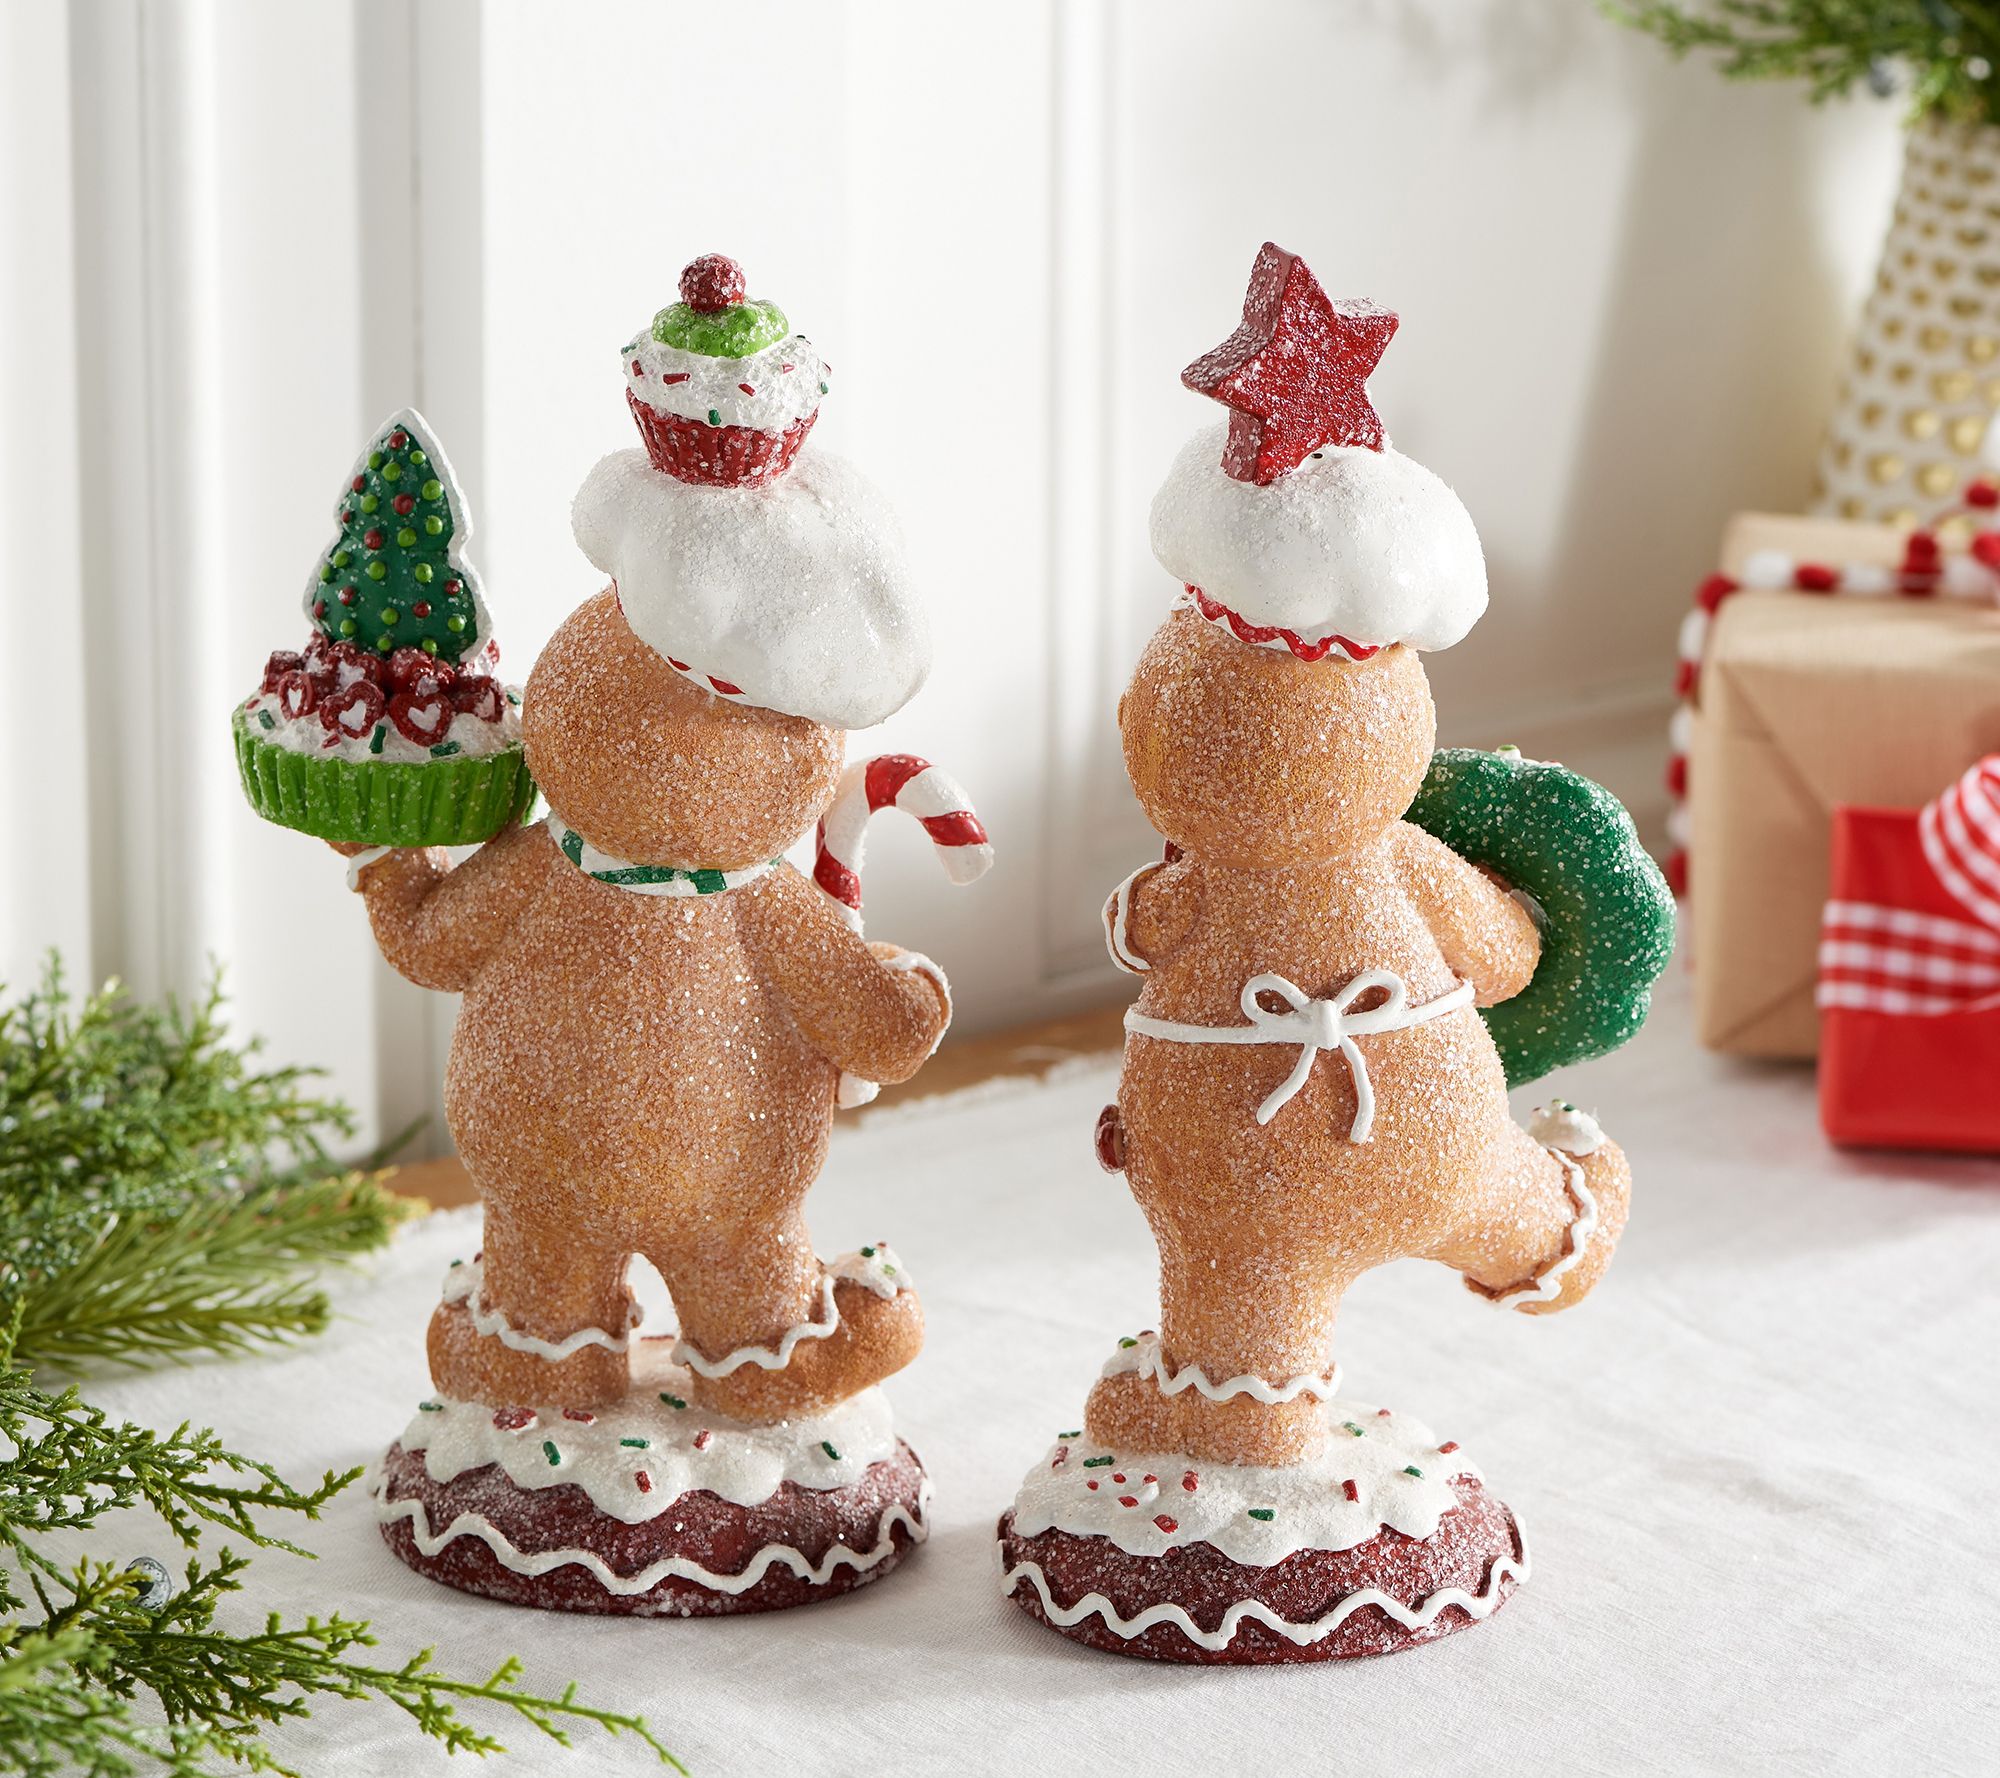 2 Piece Sugared Gingerbread Figures with Sweet Treats by Valerie